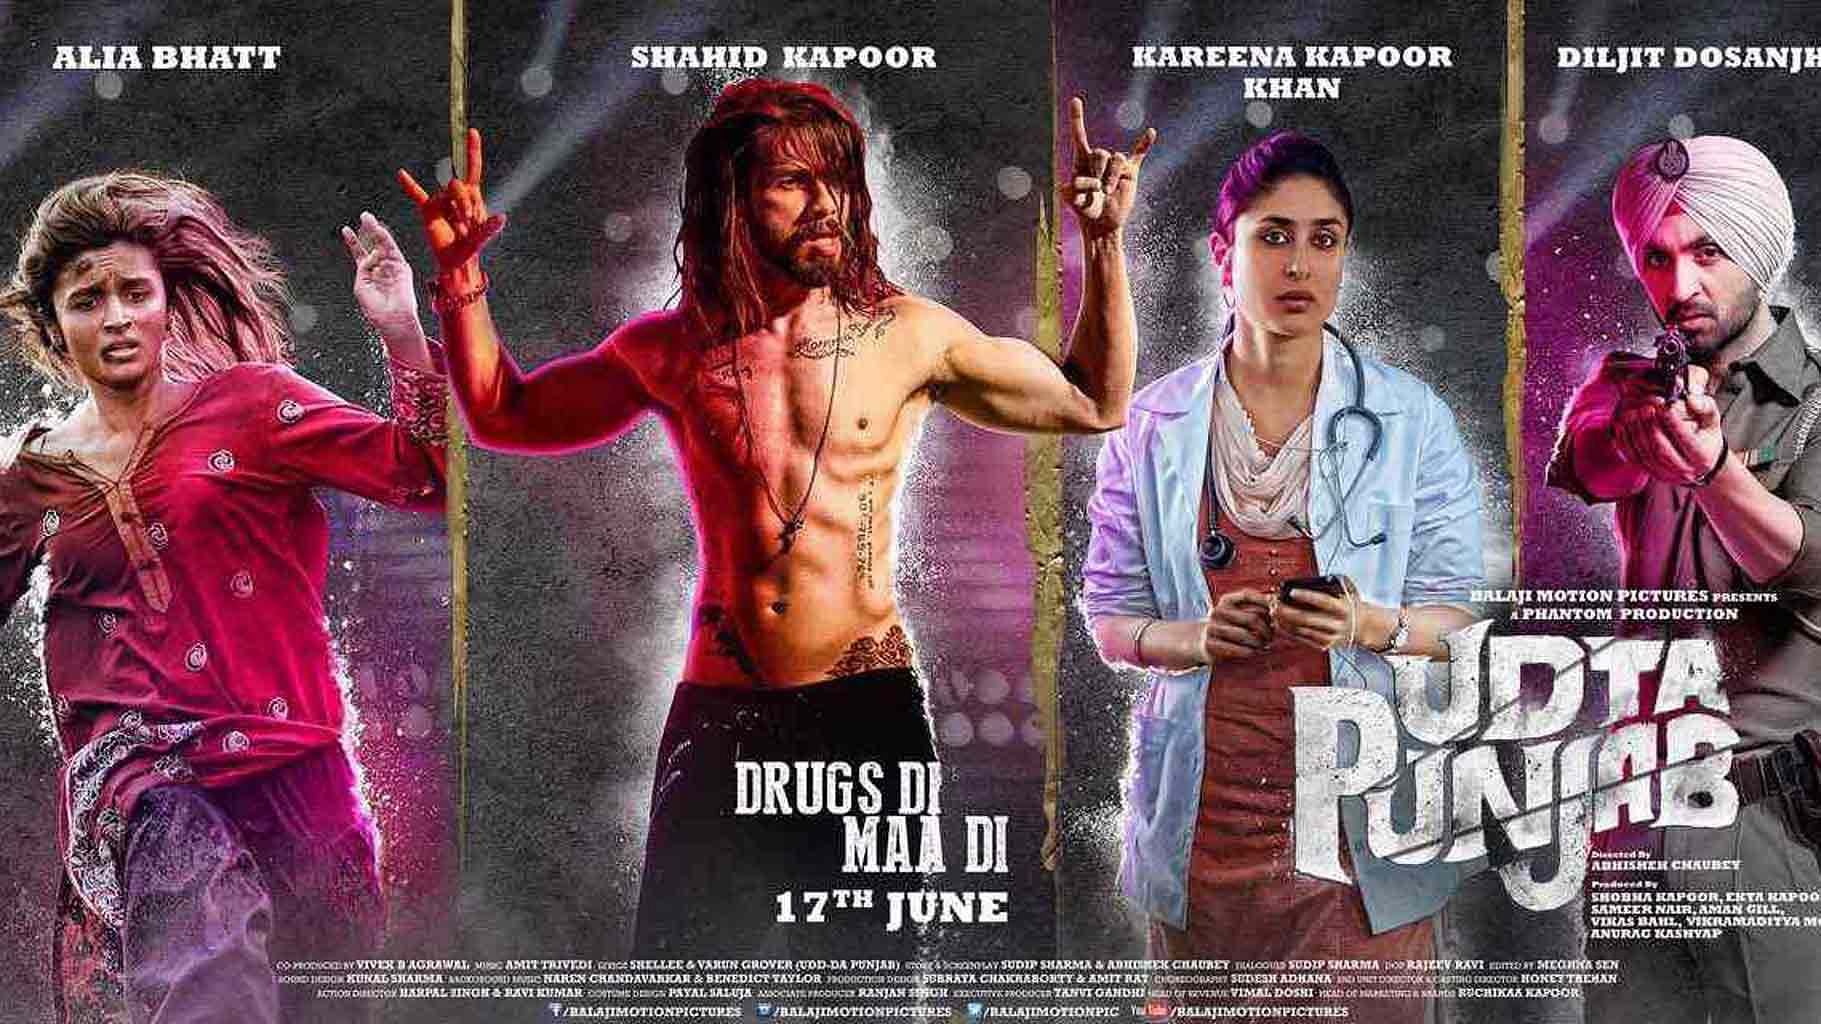 Poster of Udta Punjab. (Photo courtesy: Facebook/<a href="https://www.facebook.com/Balajimotionpictures/photos/pb.665463160186144.-2207520000.1465309118./1062539223811867/?type=3&amp;theater">Balaji Motion Pictures</a>)